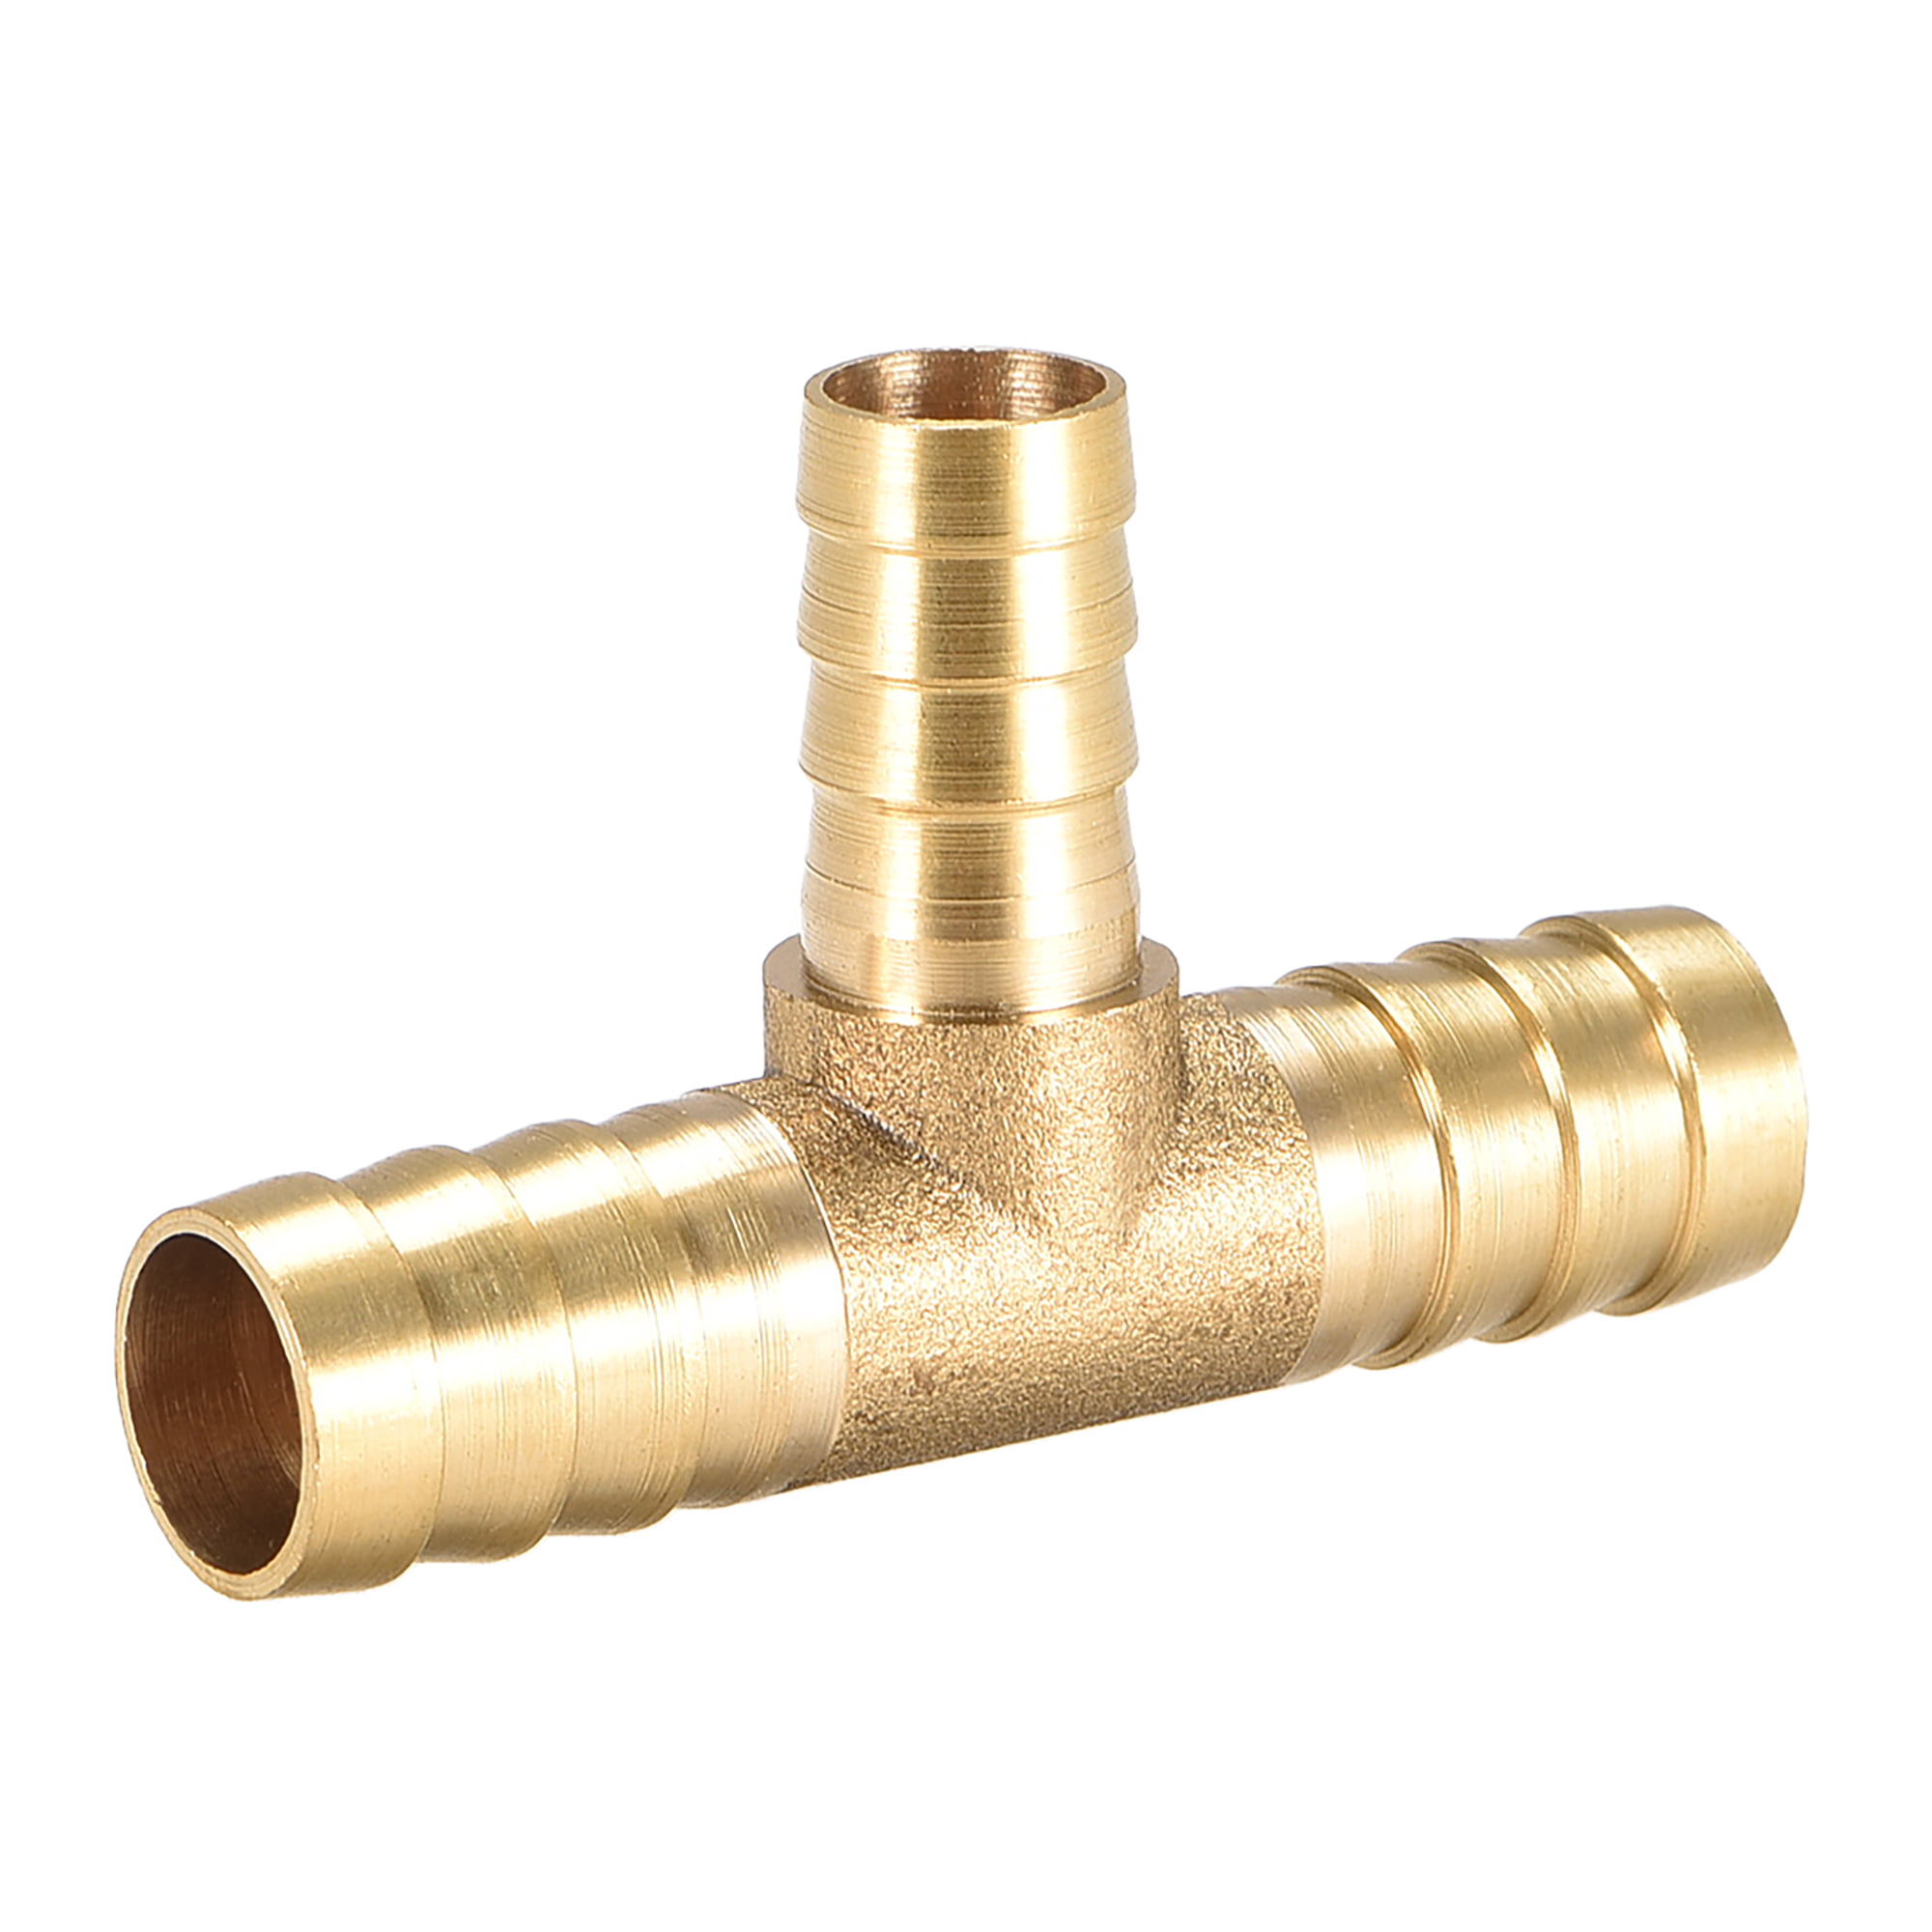 British Made 8mm Brass Hose Repair Fitting 8mm Hose Connector 